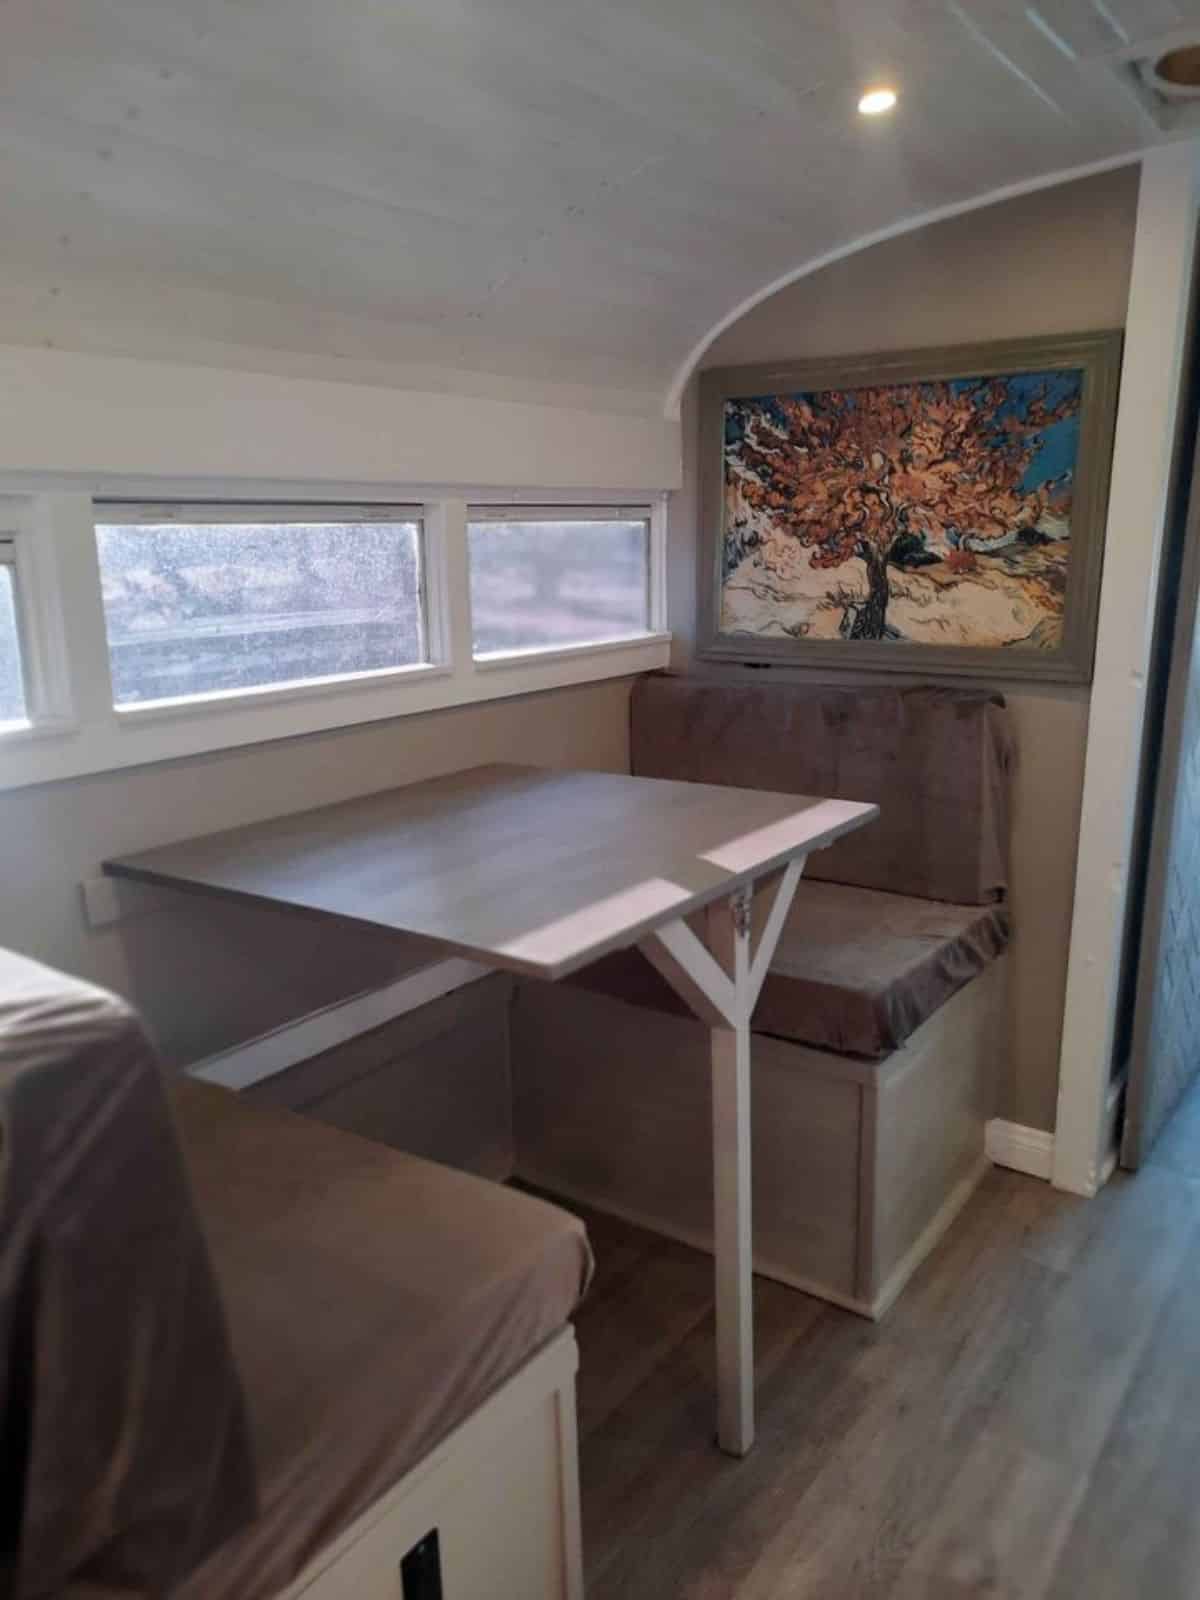 Dining area of converted tiny home